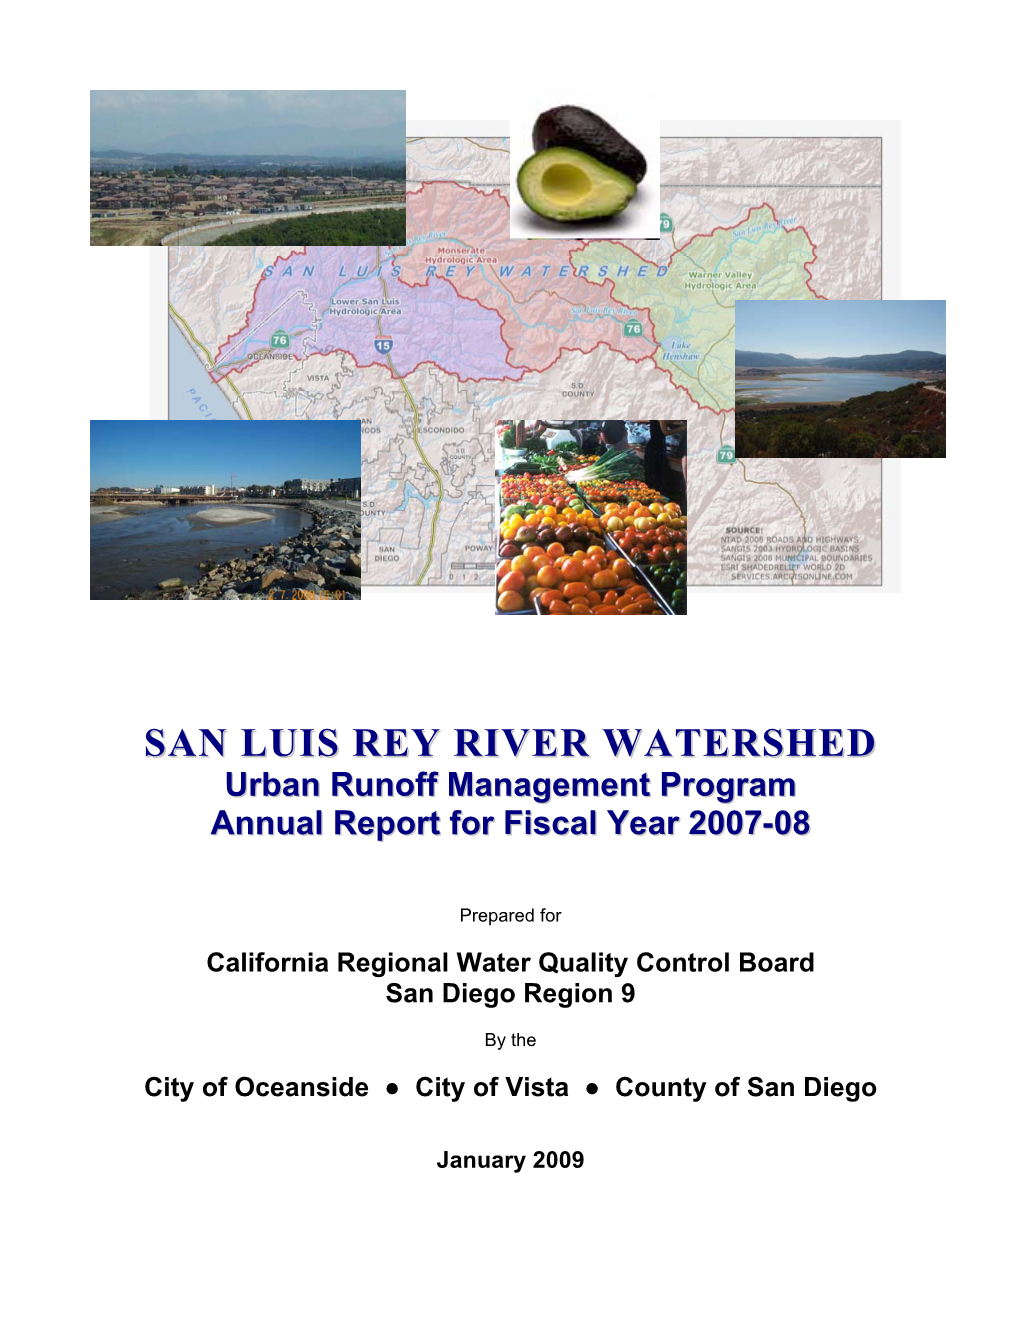 SAN LUIS REY RIVER WATERSHED URBAN RUNOFF MANAGEMENT PROGRAM Annual Report for Fiscal Year 2007-08